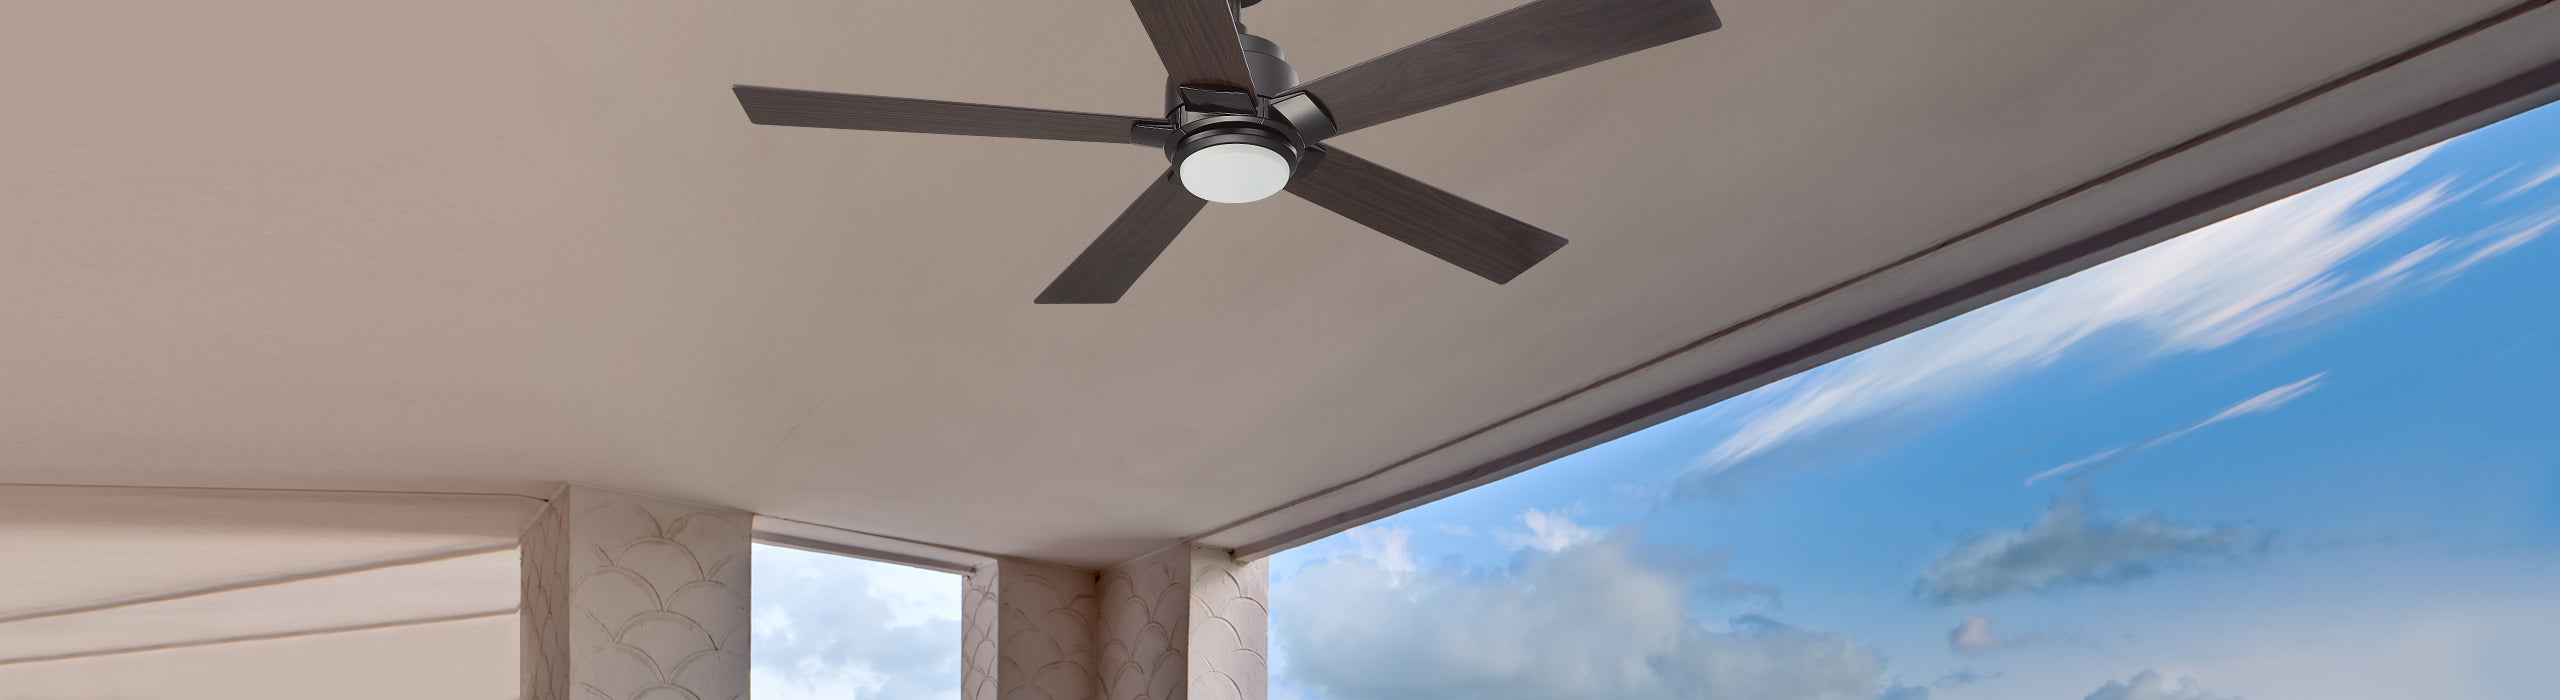 REVITALIZE THE OUTDOORS CEILING FAN